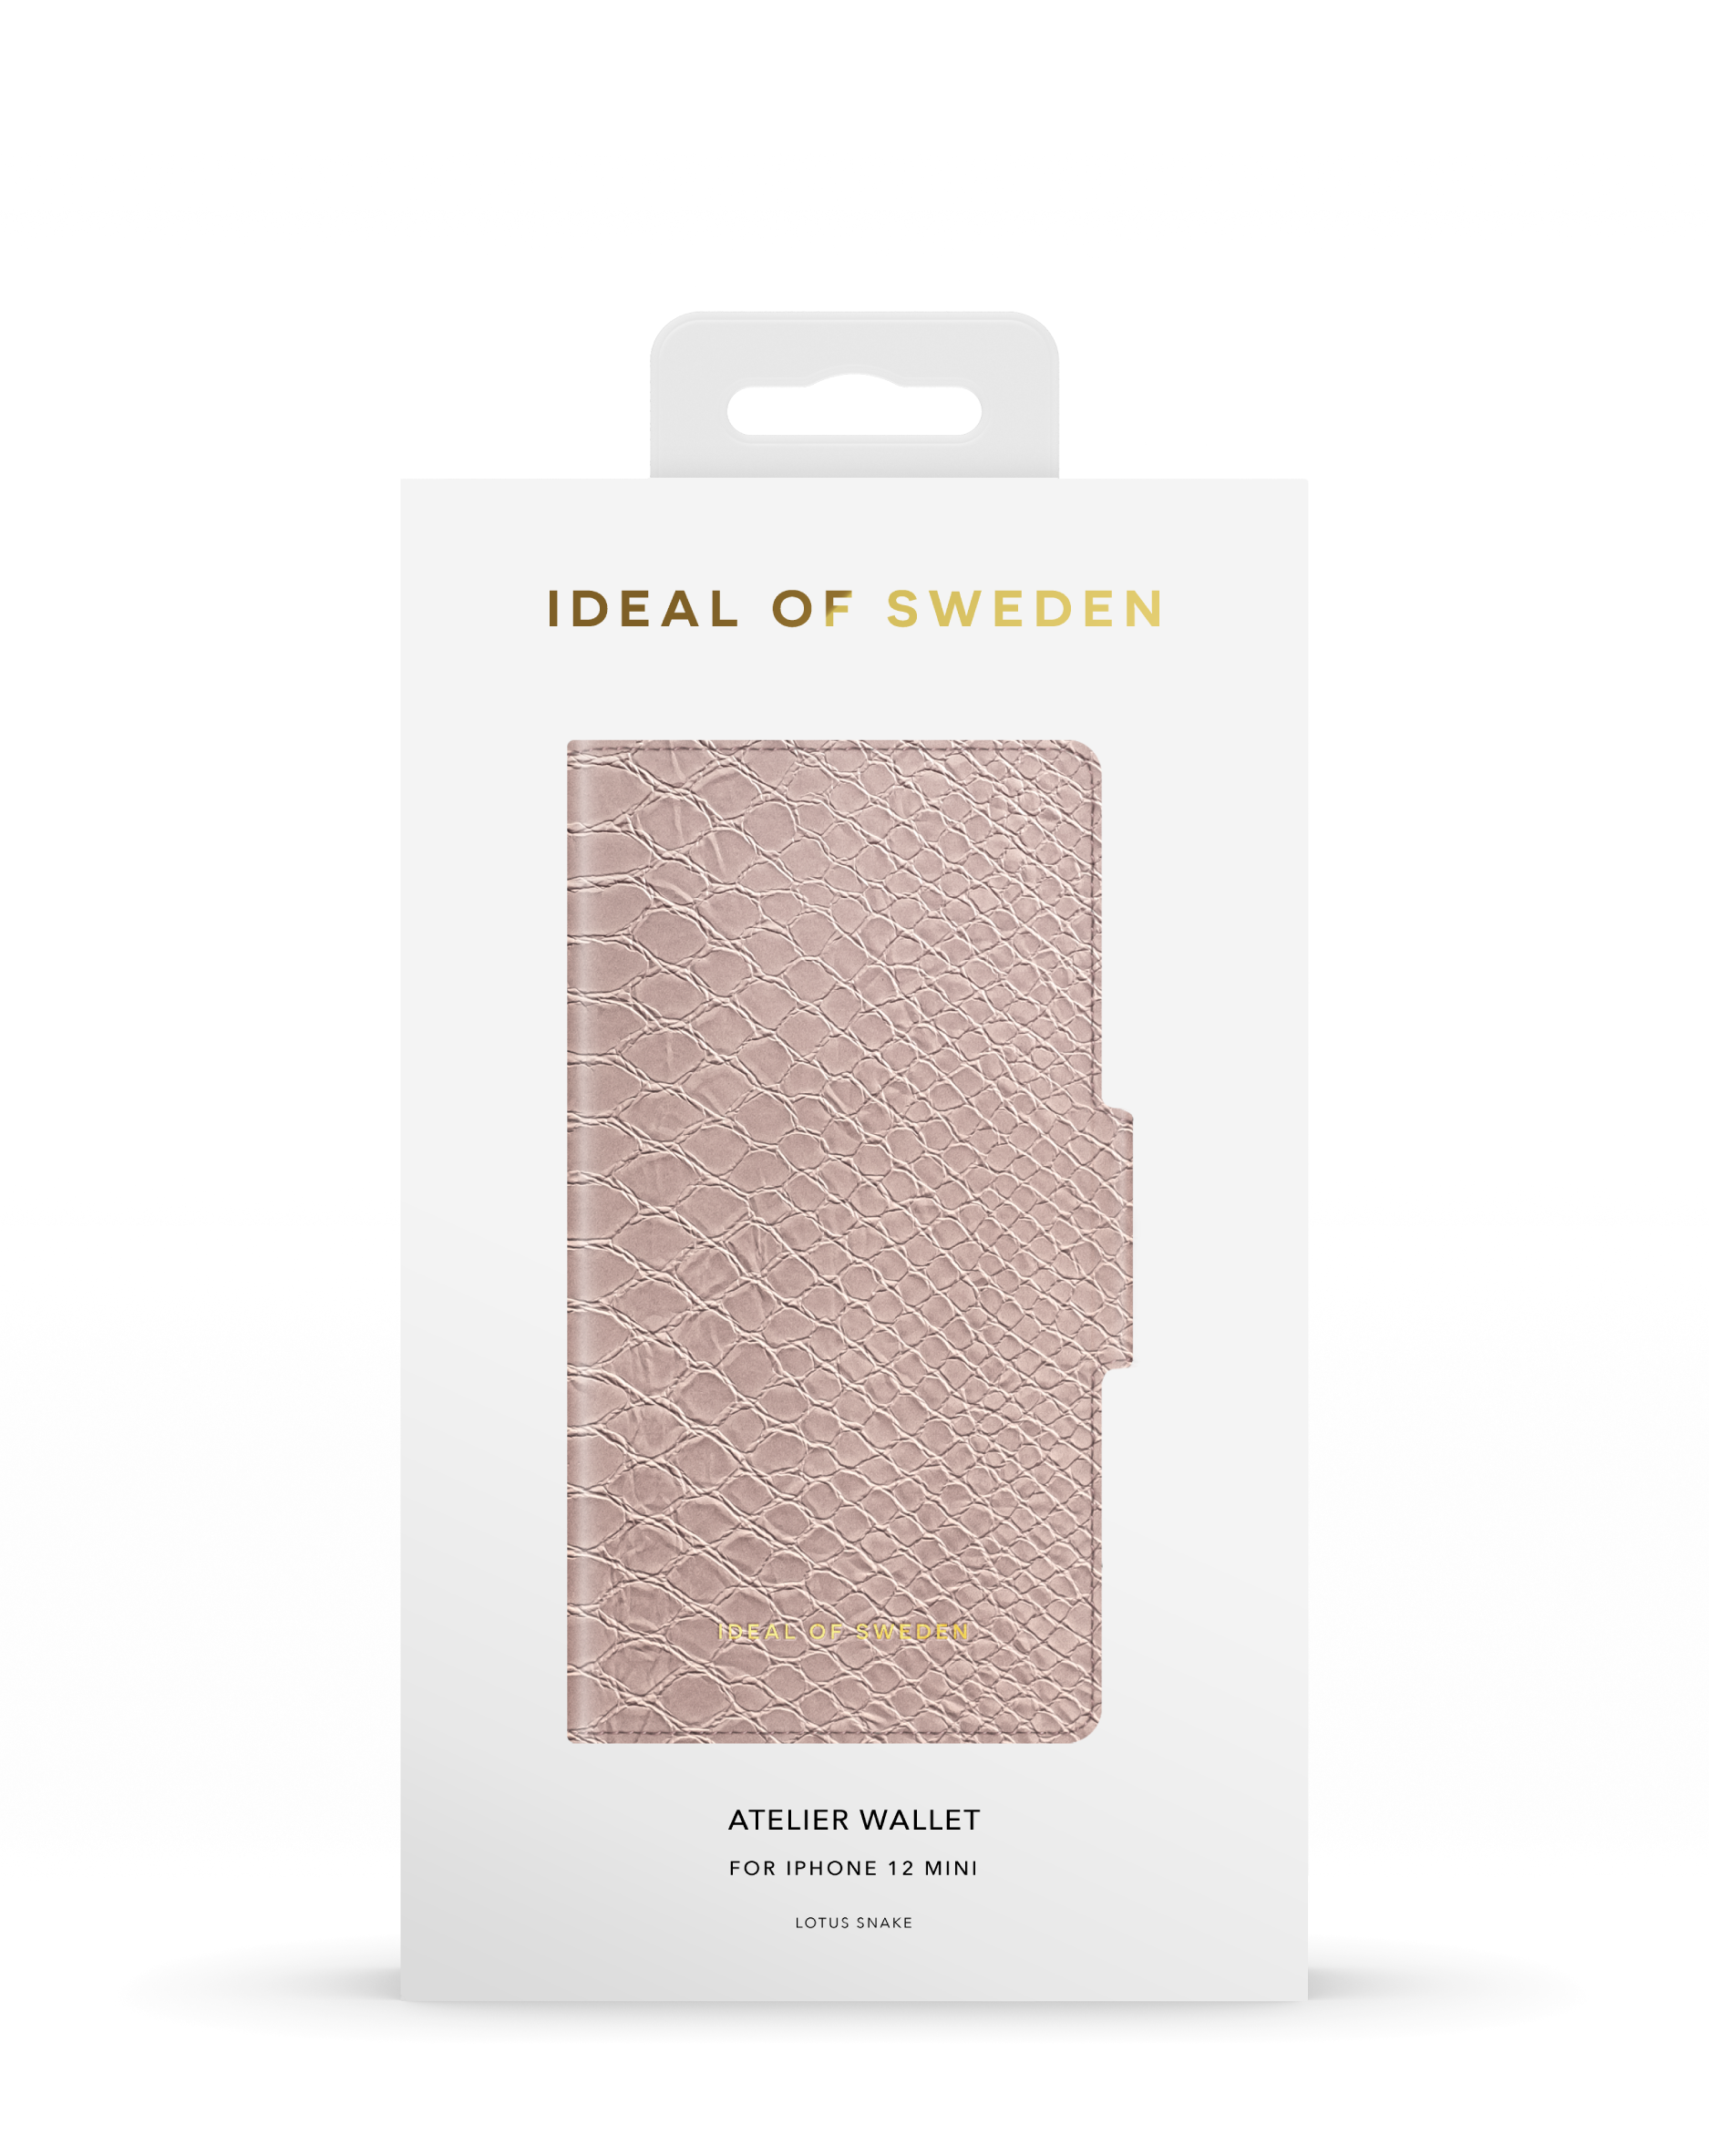 IDEAL OF SWEDEN 12 Snake IDAW-I2054-234, Bookcover, IPhone Apple, mini, Lotus